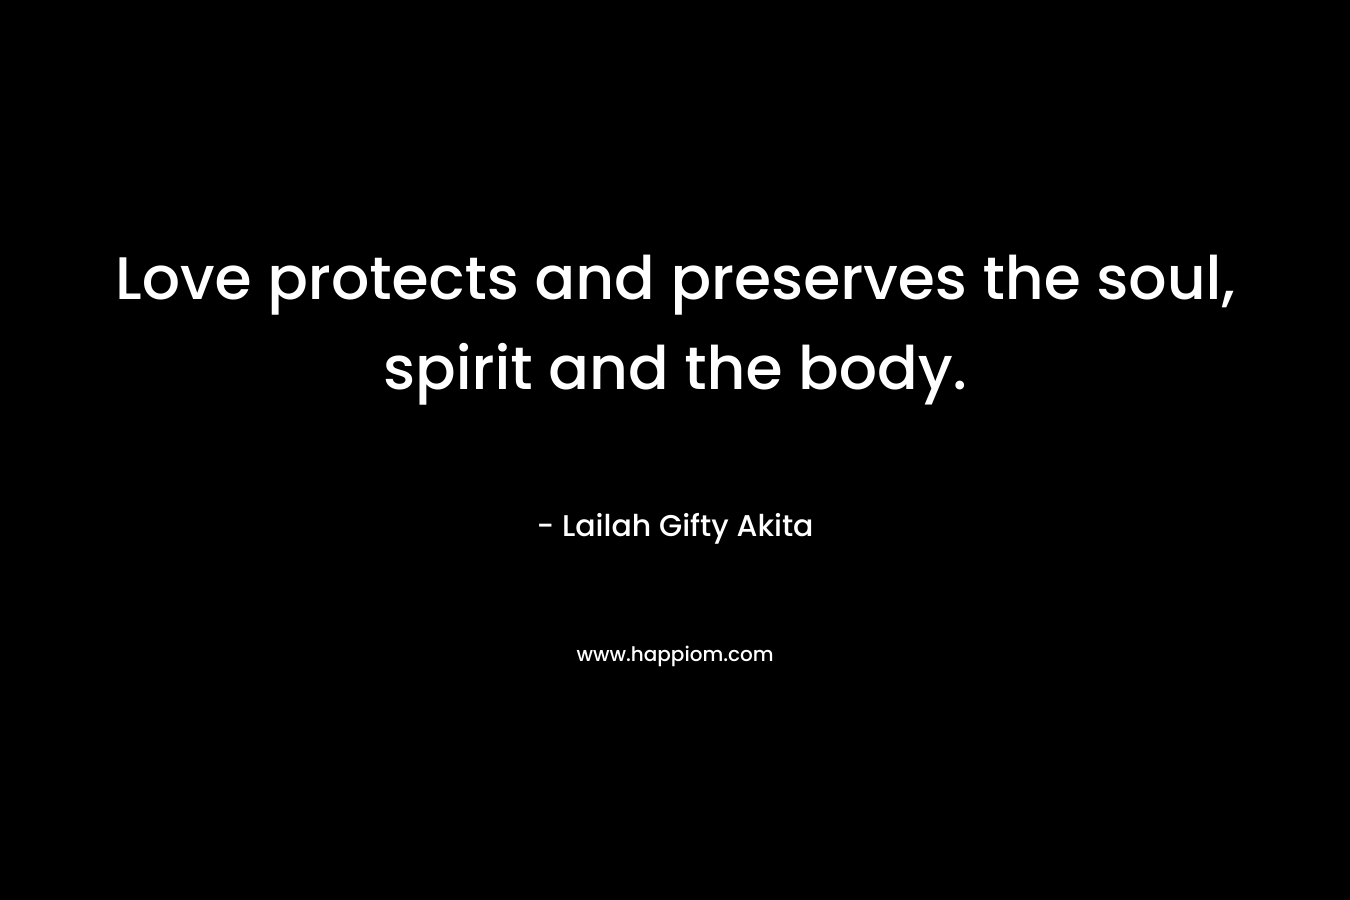 Love protects and preserves the soul, spirit and the body. – Lailah Gifty Akita